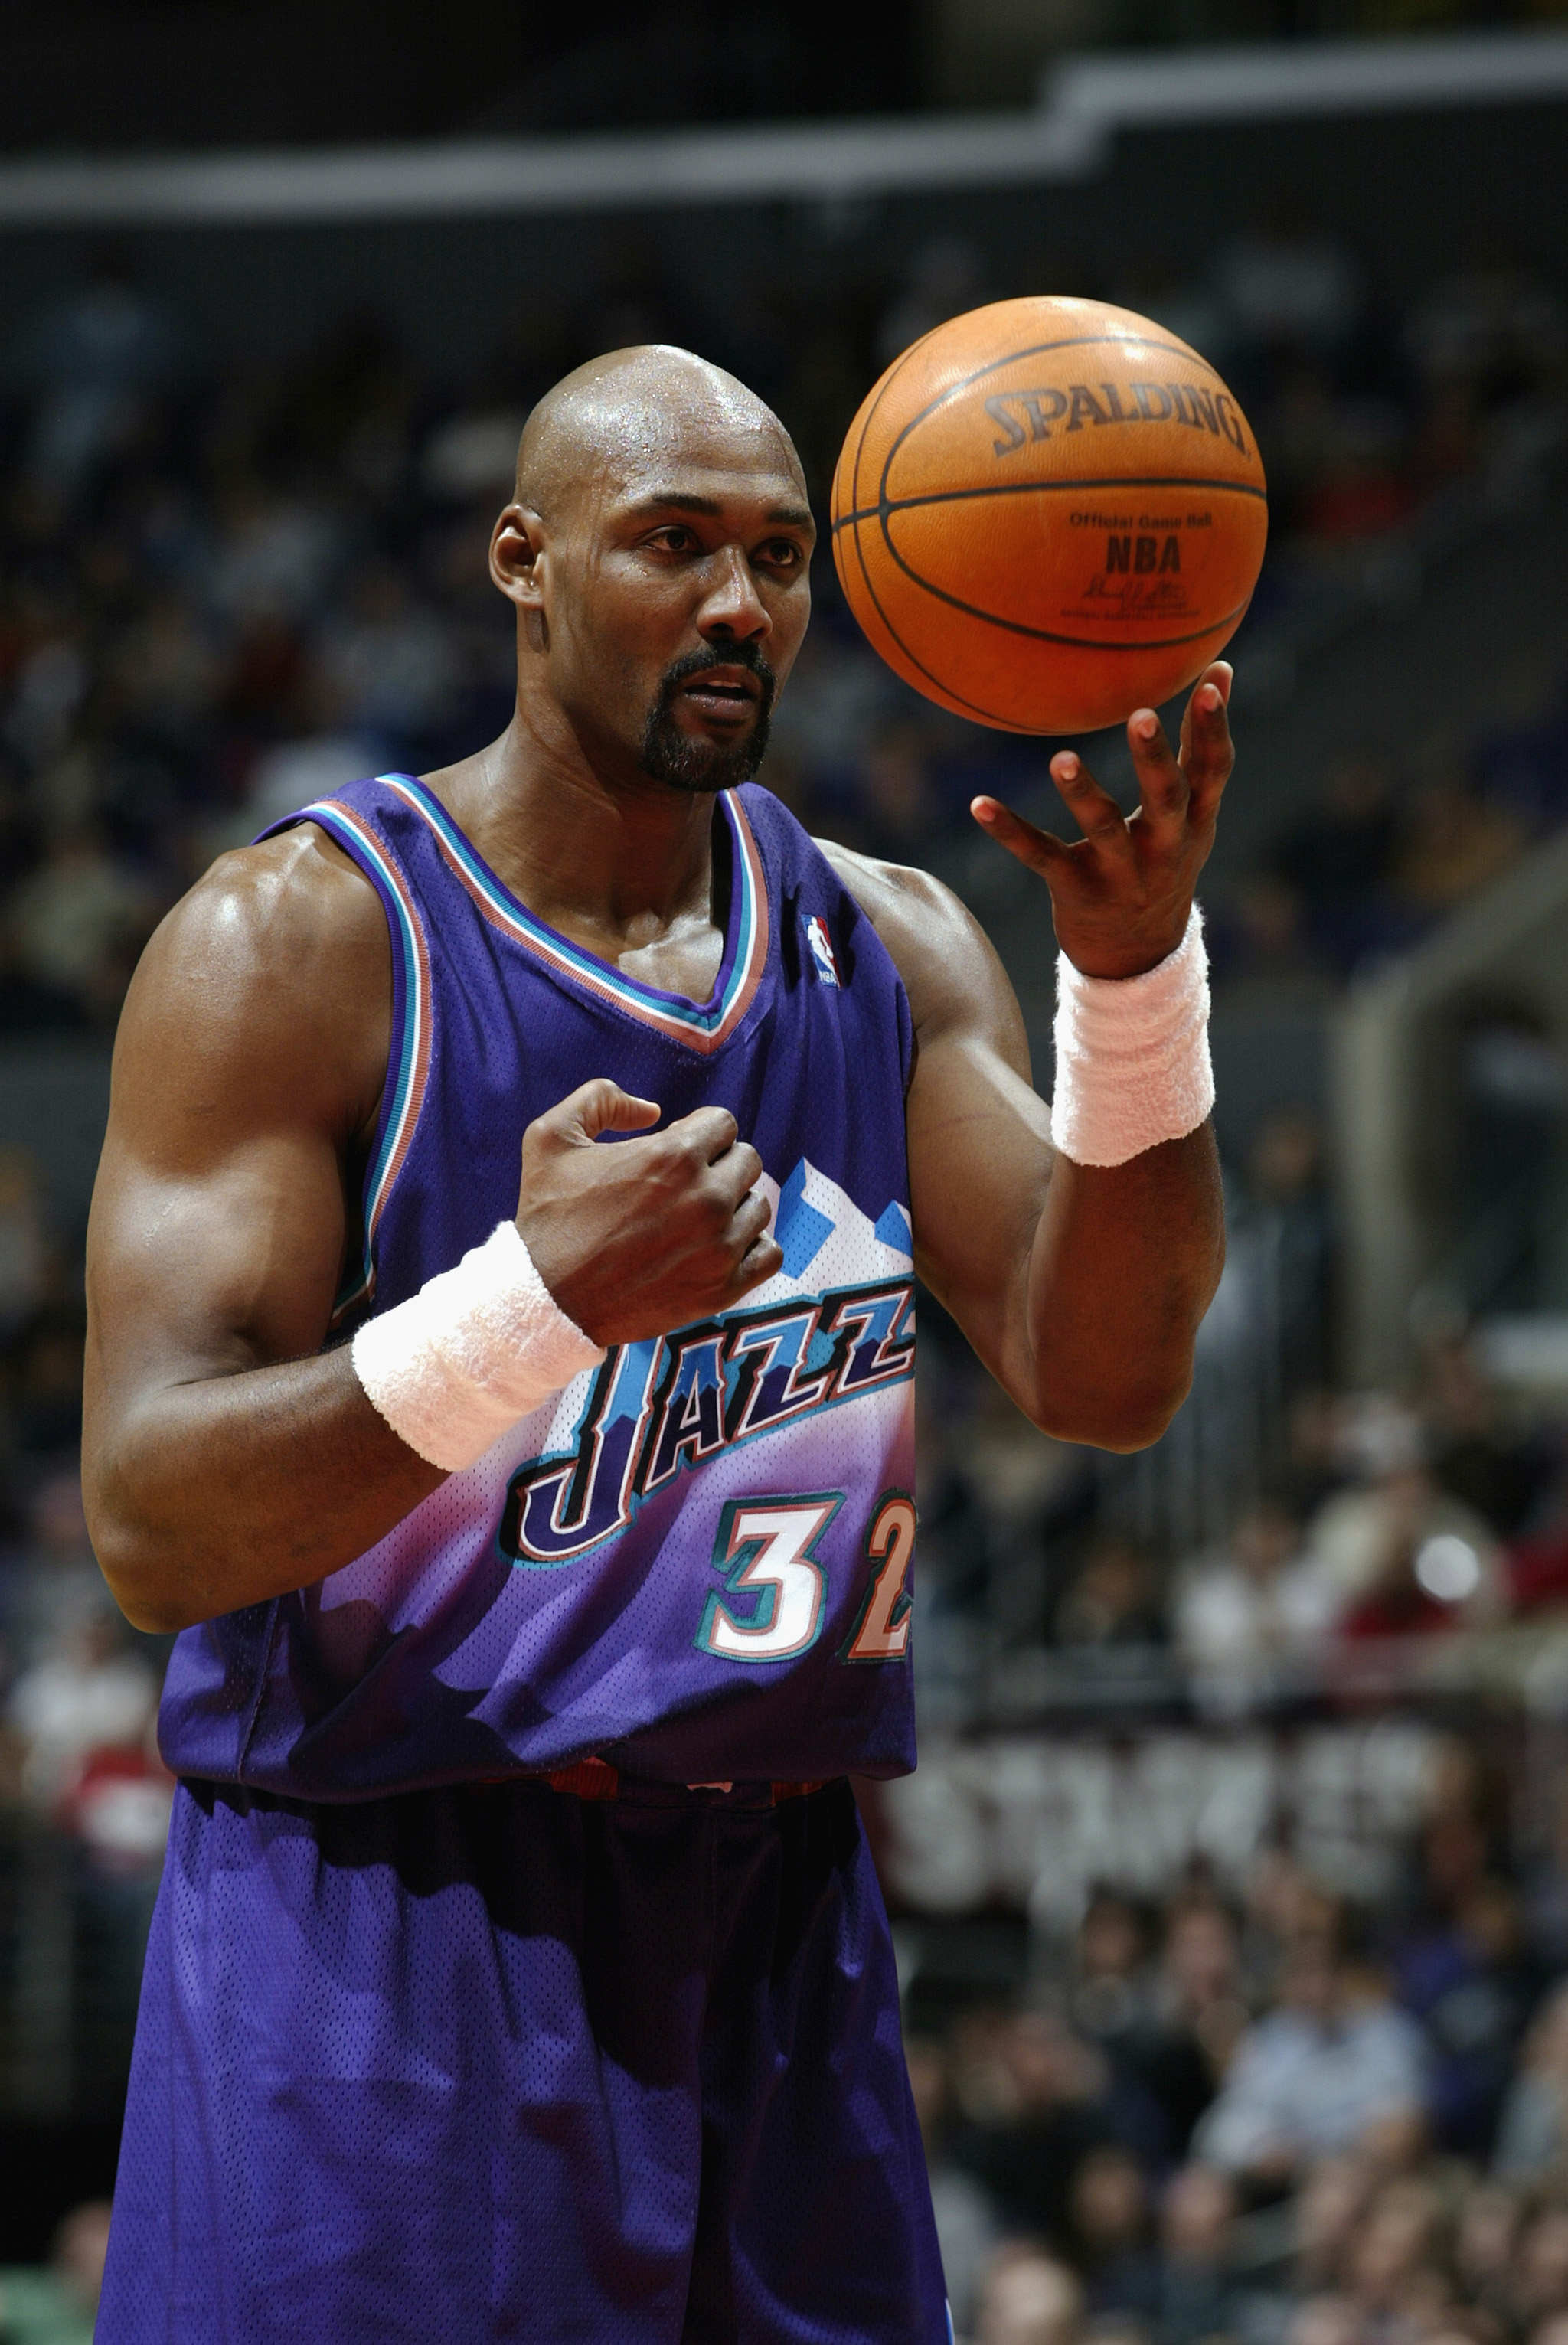 Nick Van Exel used to shoot his free throws from about 17 feet instead of  15 feet : r/nba